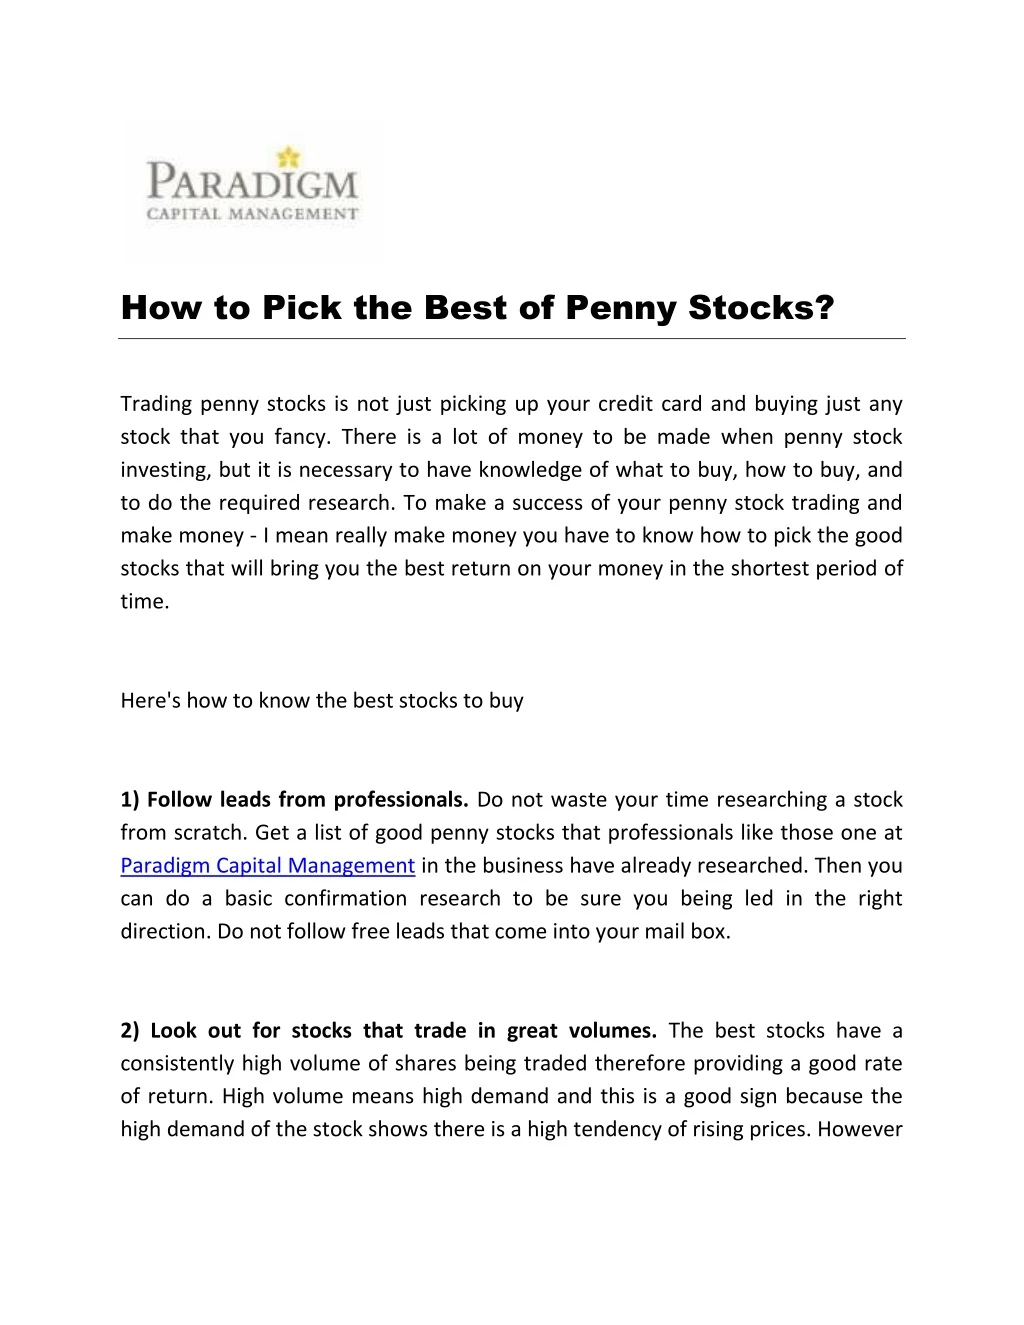 how to pick the best of penny stocks